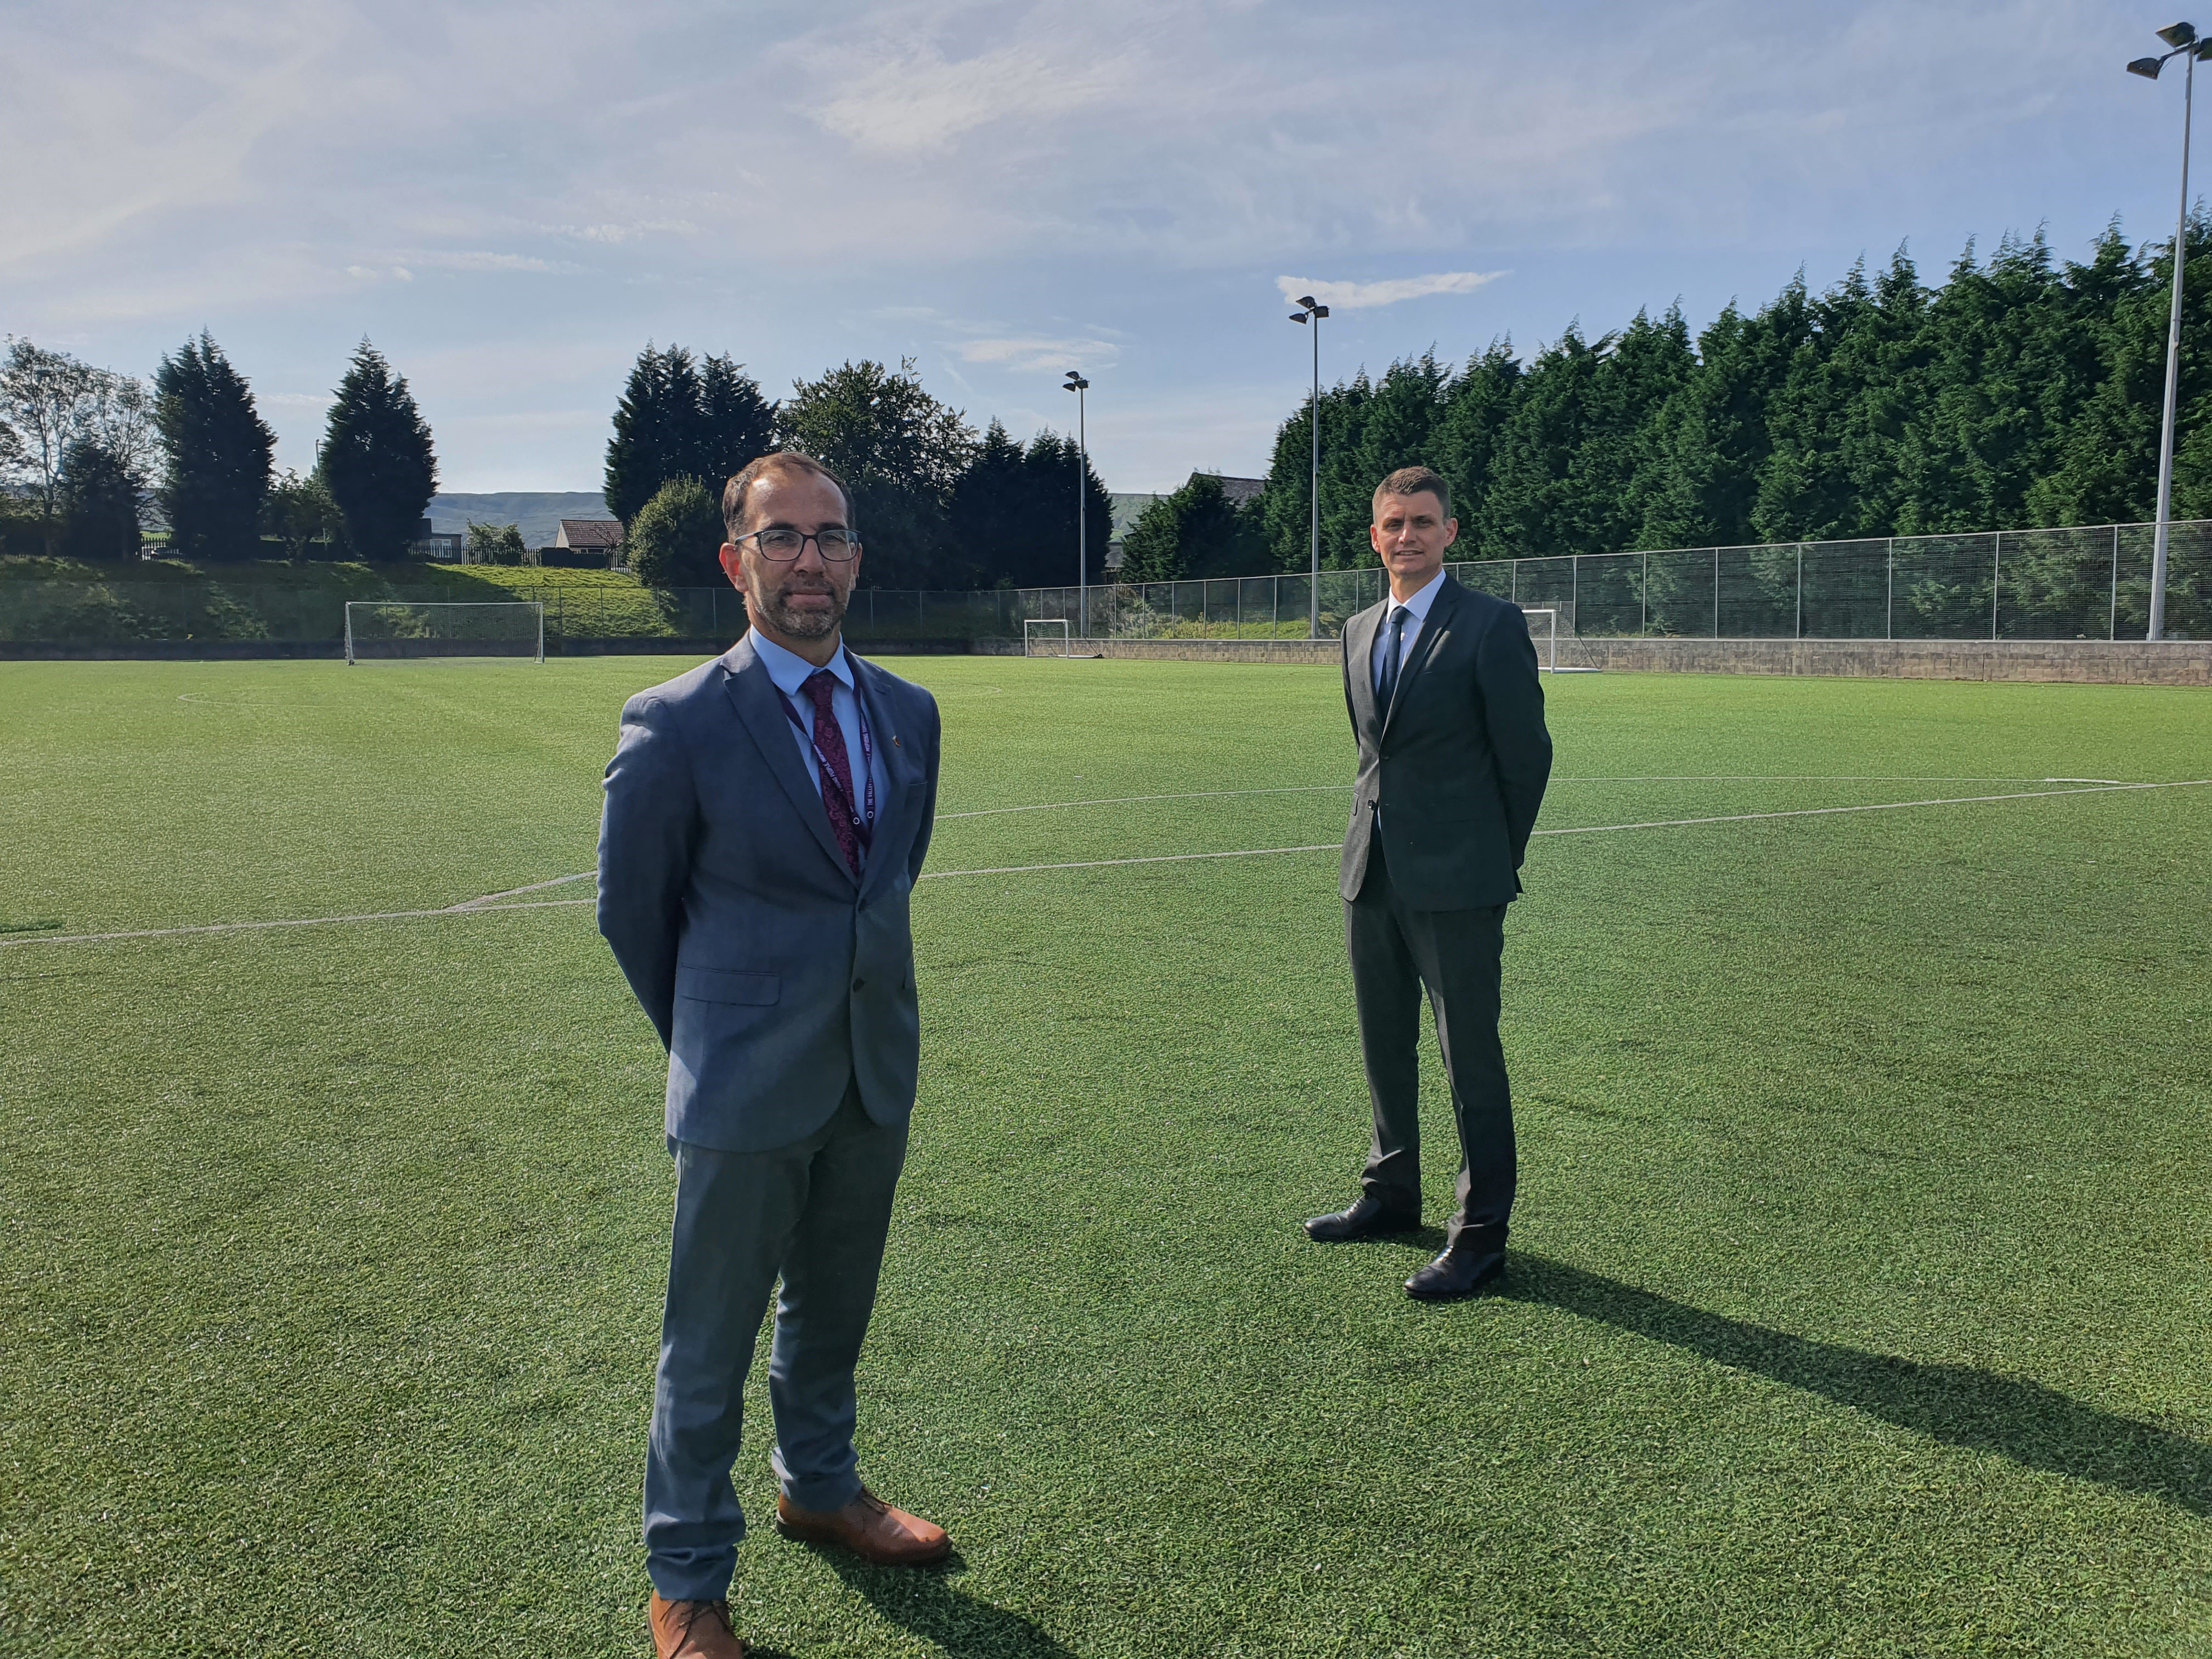 Two men stand 2m apart on a school field facing the camera